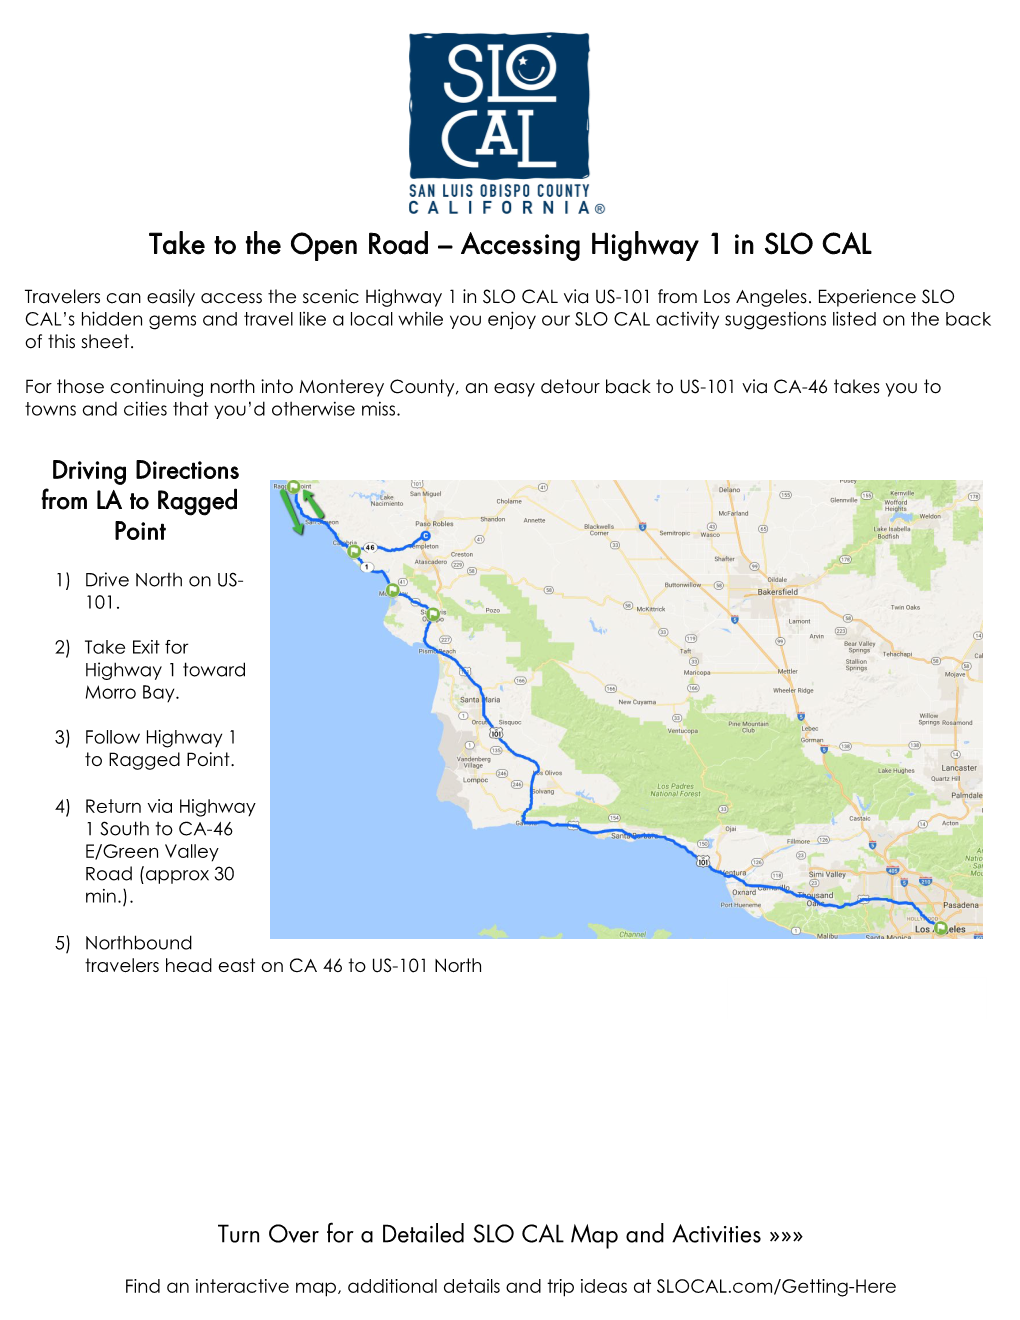 Take to the Open Road – Accessing Highway 1 in SLO CAL